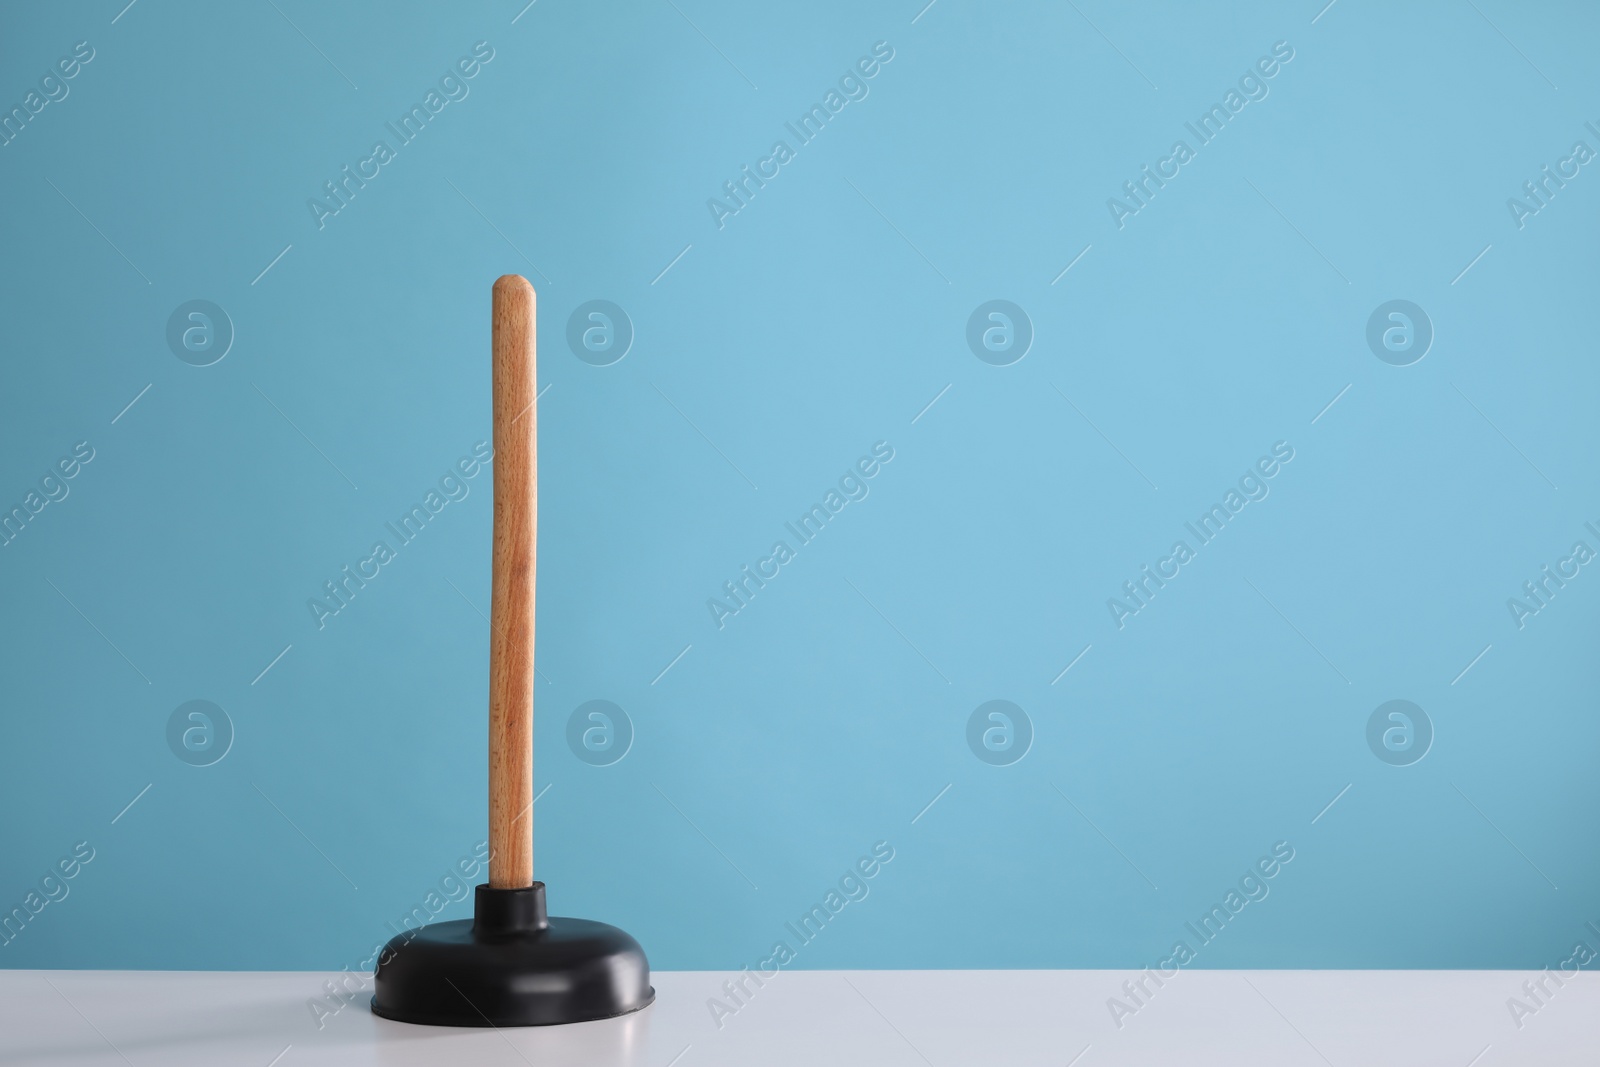 Photo of Plunger on white table against turquoise background. Space for text